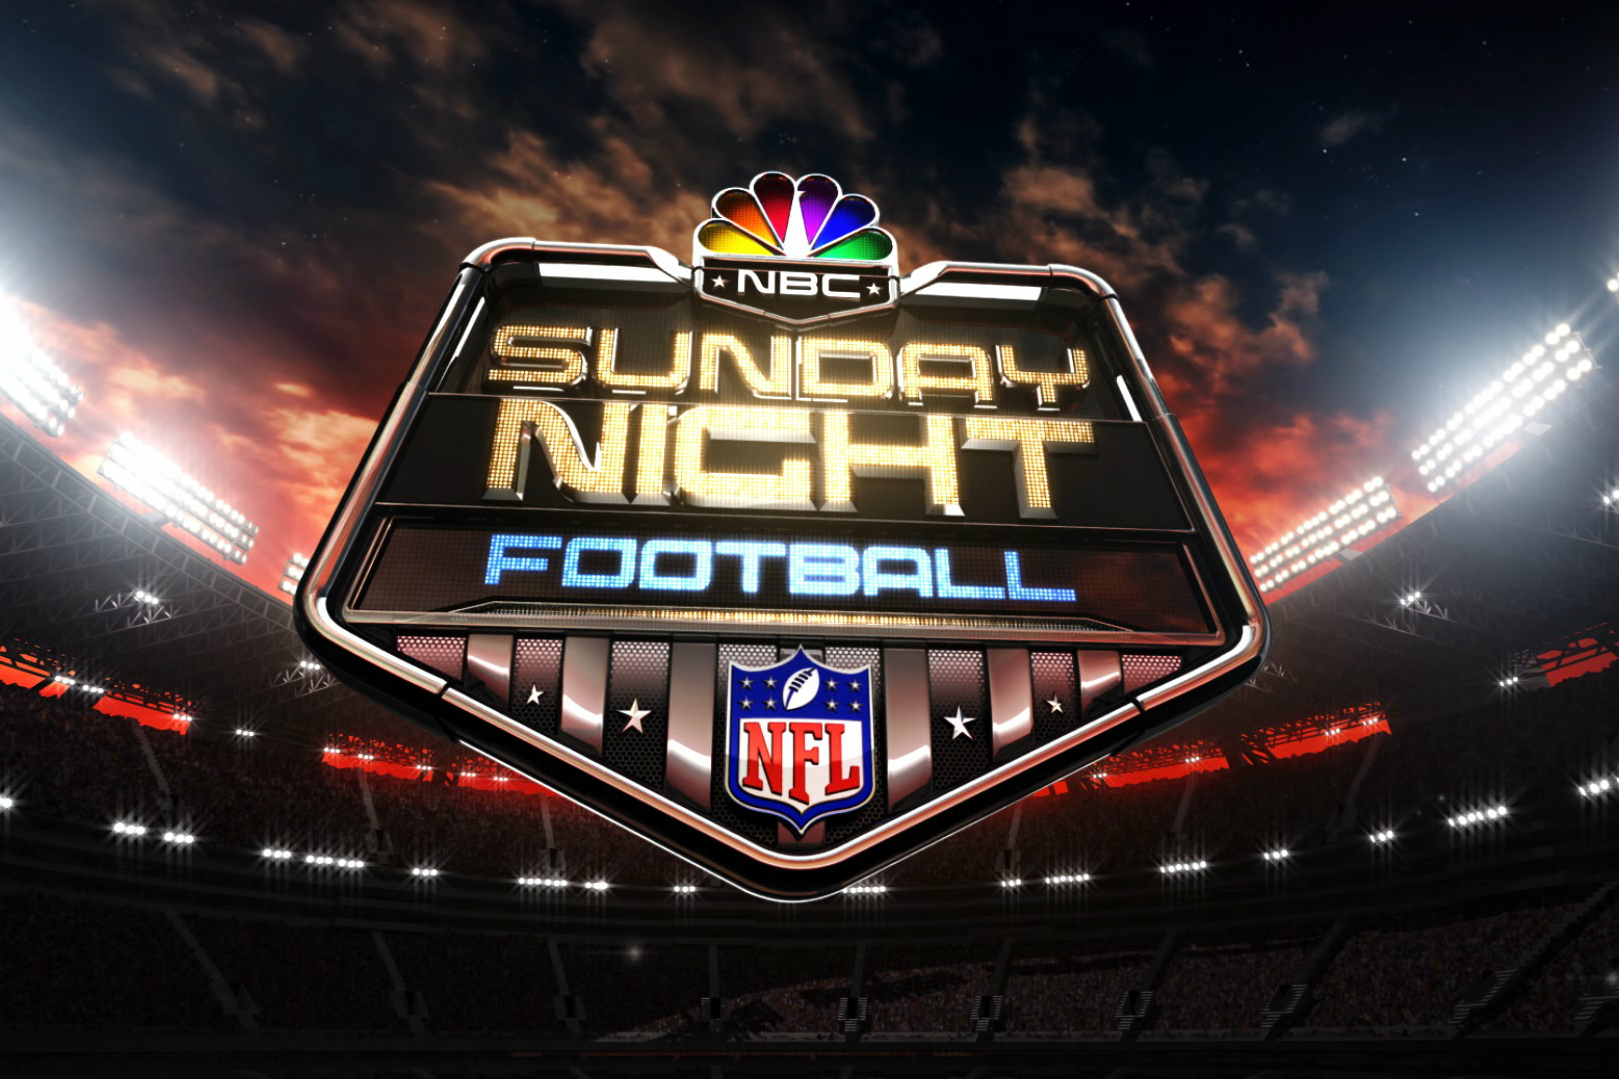 In 2018, You'll Be Able to Watch Sunday Night Football on Your Phone